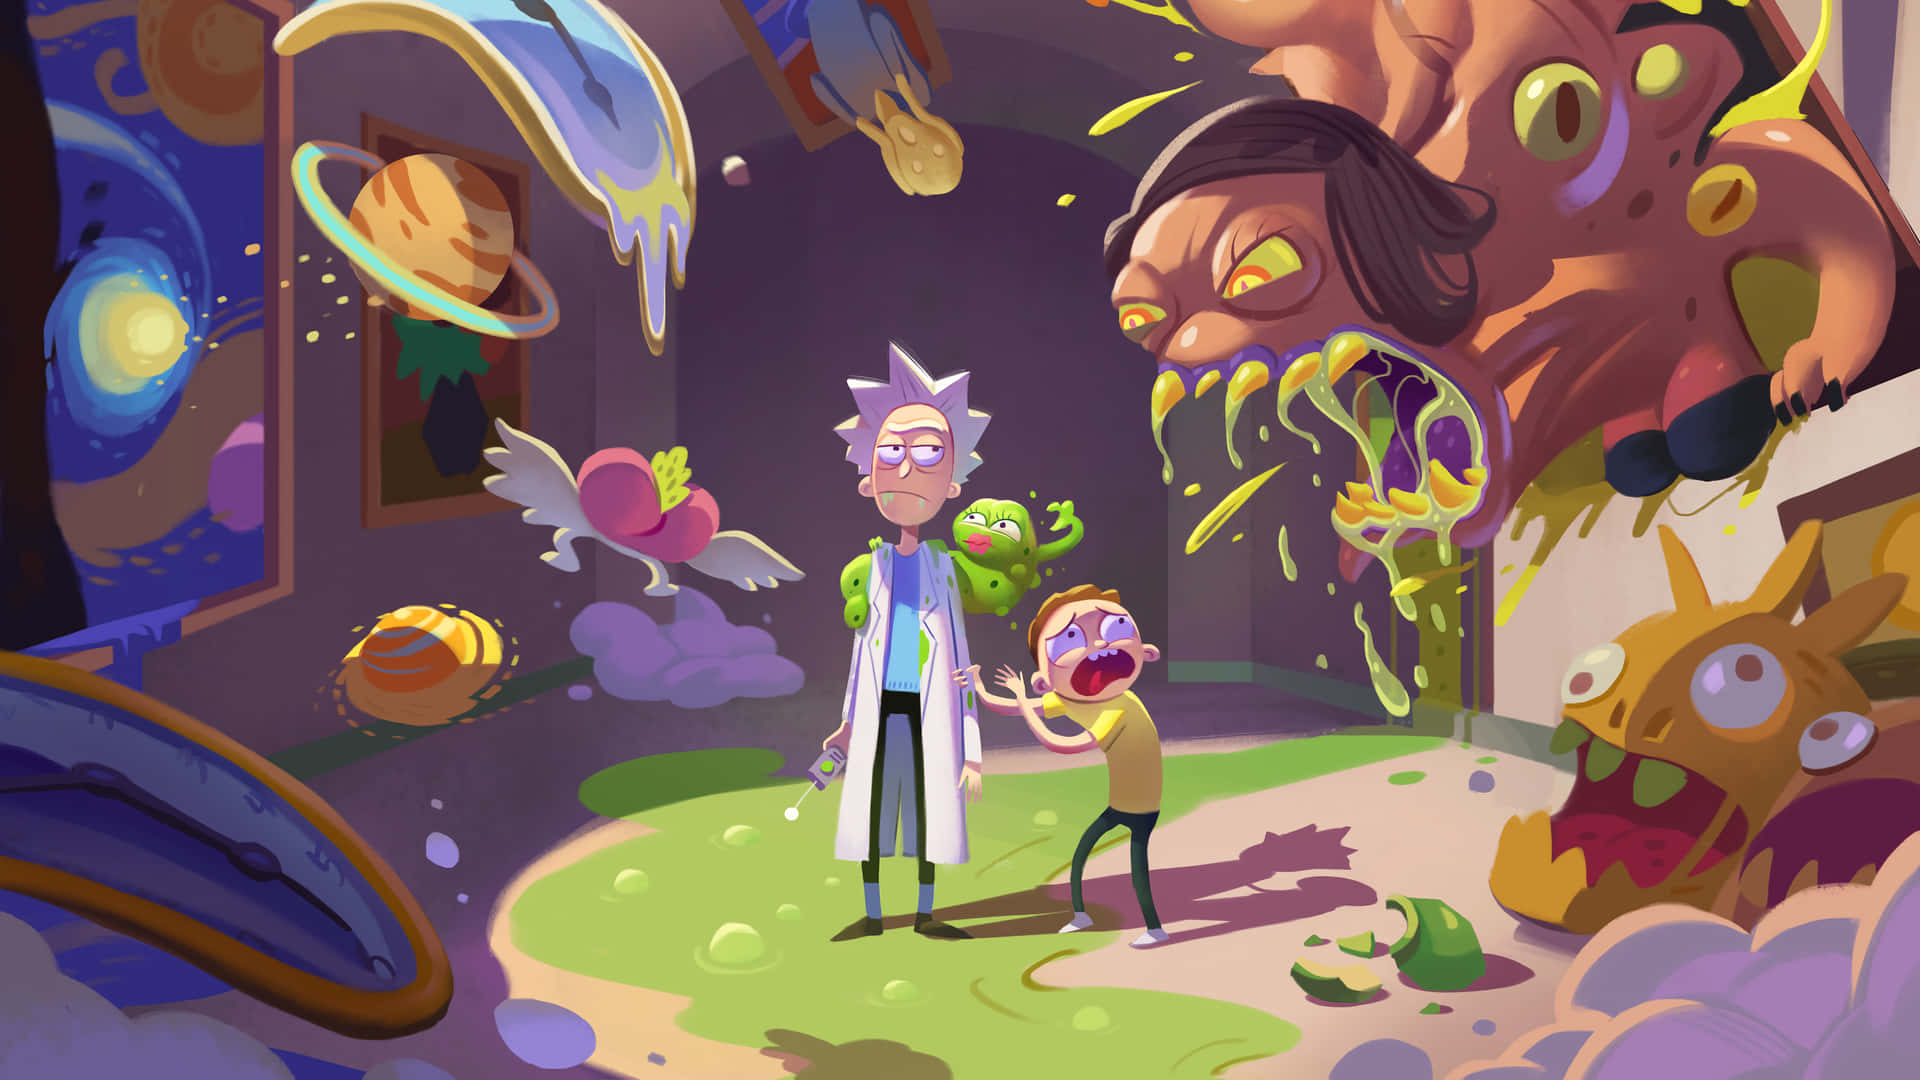 Rick and Morty take on their wildest adventure yet...